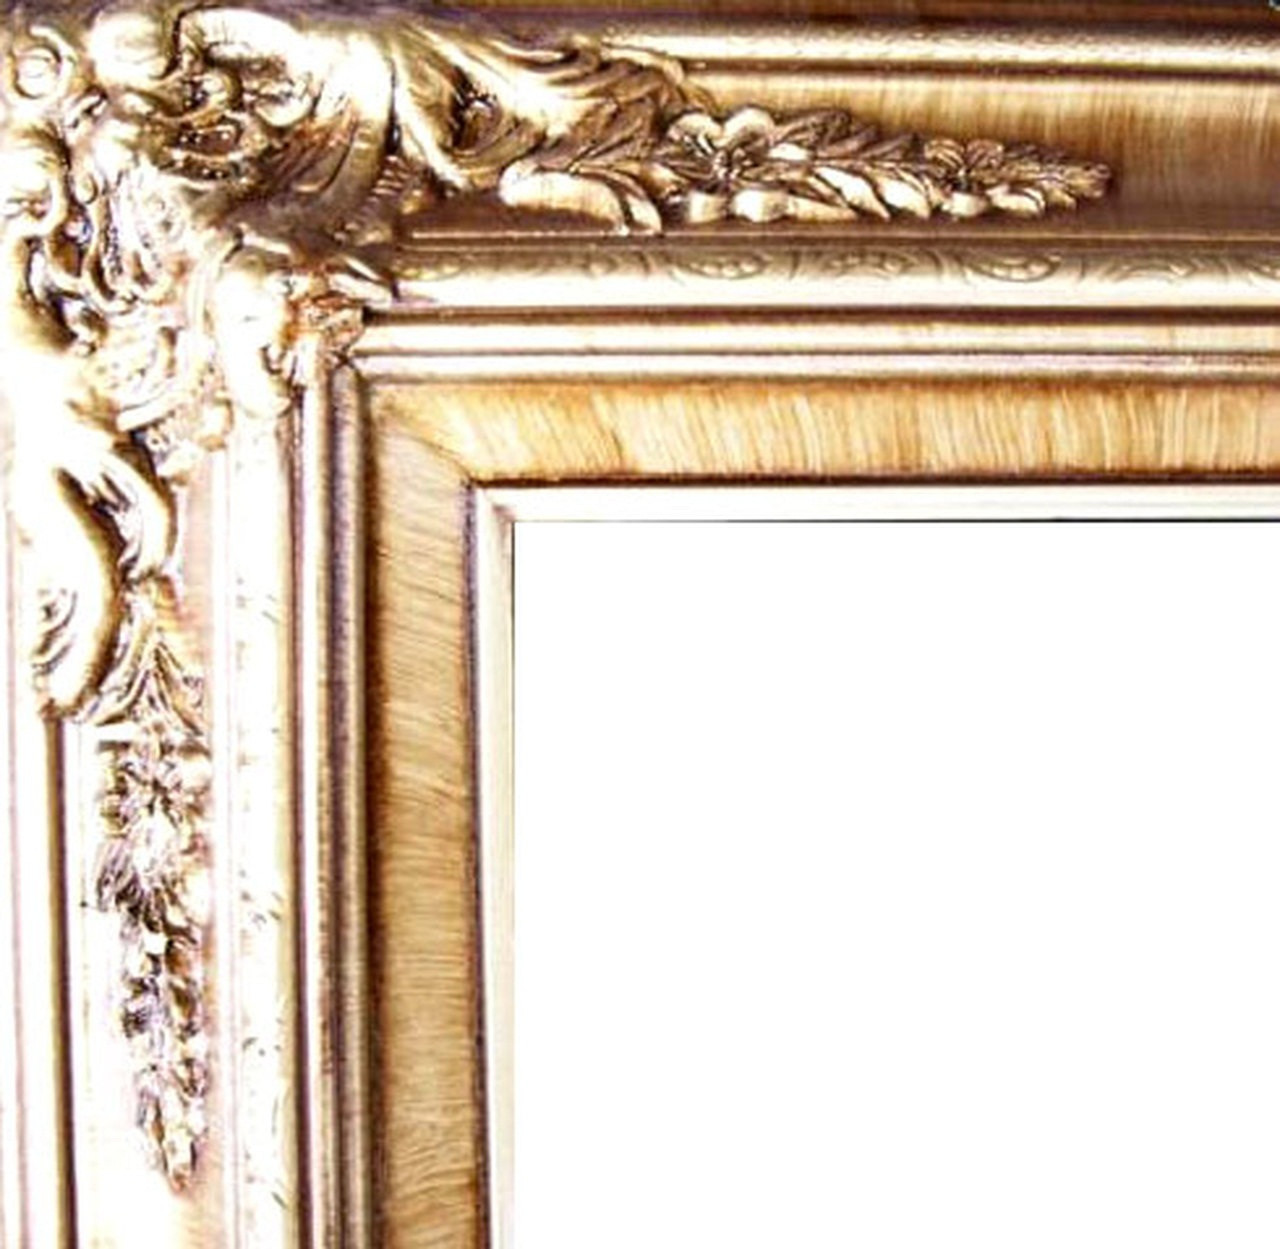 Gallery Wall Gold Wood 16x24 Picture Frame 16x24 Frame 16 x 24